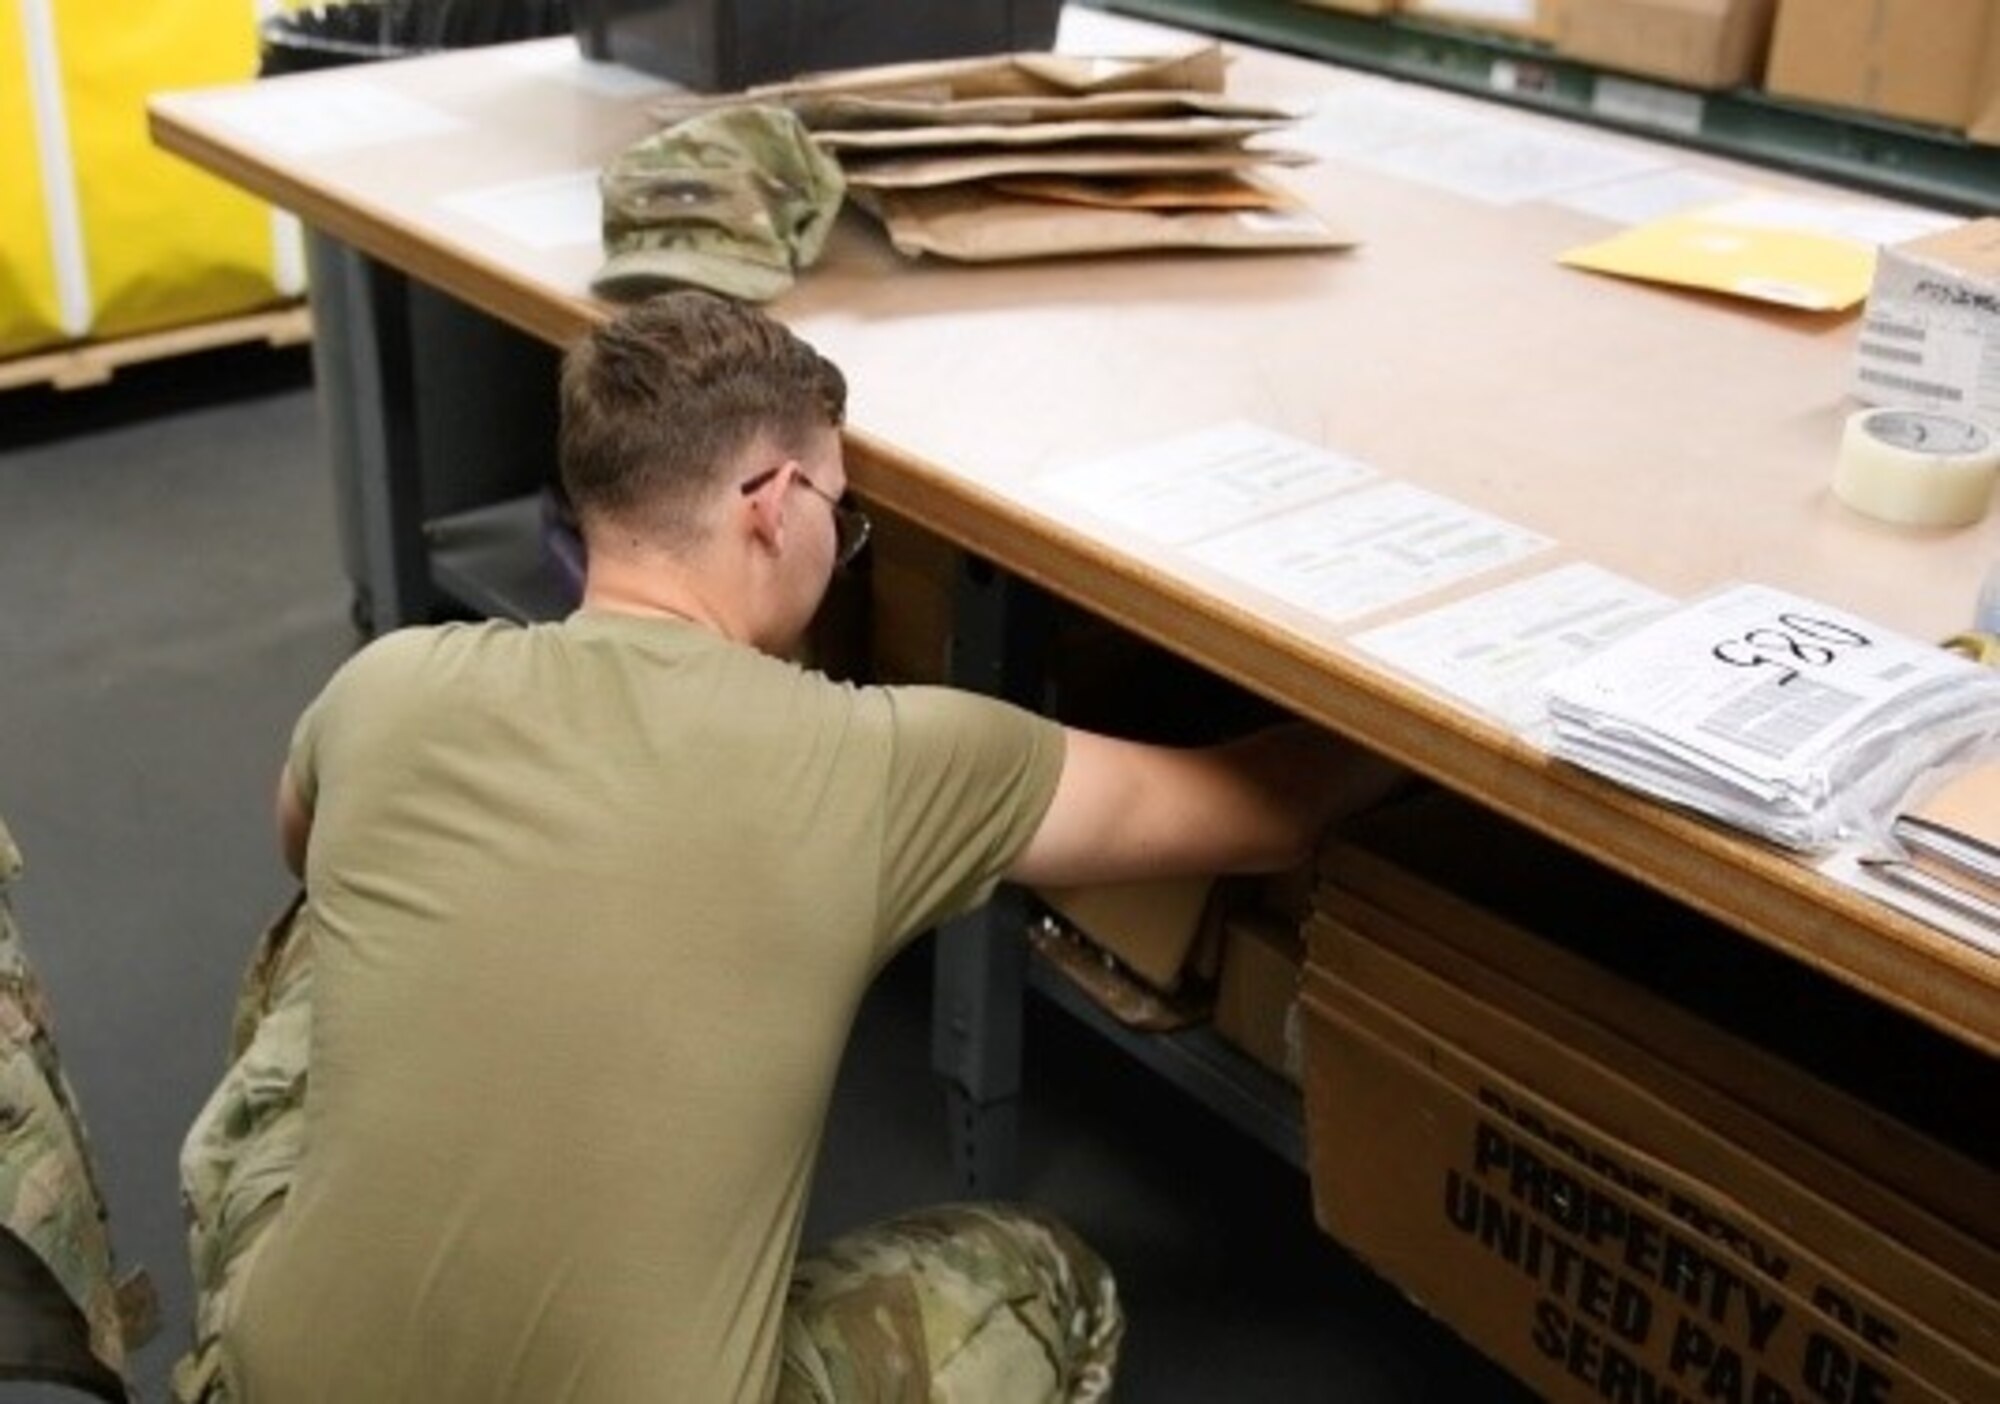 Airman 1st Class Brett Tristen, 56th Logistics Readiness Squadron Traffic Management Office (TMO) inbound receiver, reaches for packing sleeves, March 27, 2020, Luke Air Force Base, Ariz. Packing sleeves are used to place due out release forms on items being delivered to 56th LRS Vehicle Operations’ parts and distribution office. TMO Airmen support the mission by managing and transporting equipment necessary to train the world’s greatest fighter pilots and combat ready Airmen. (U.S. Air Force photo by Airman Tyler Jansen)